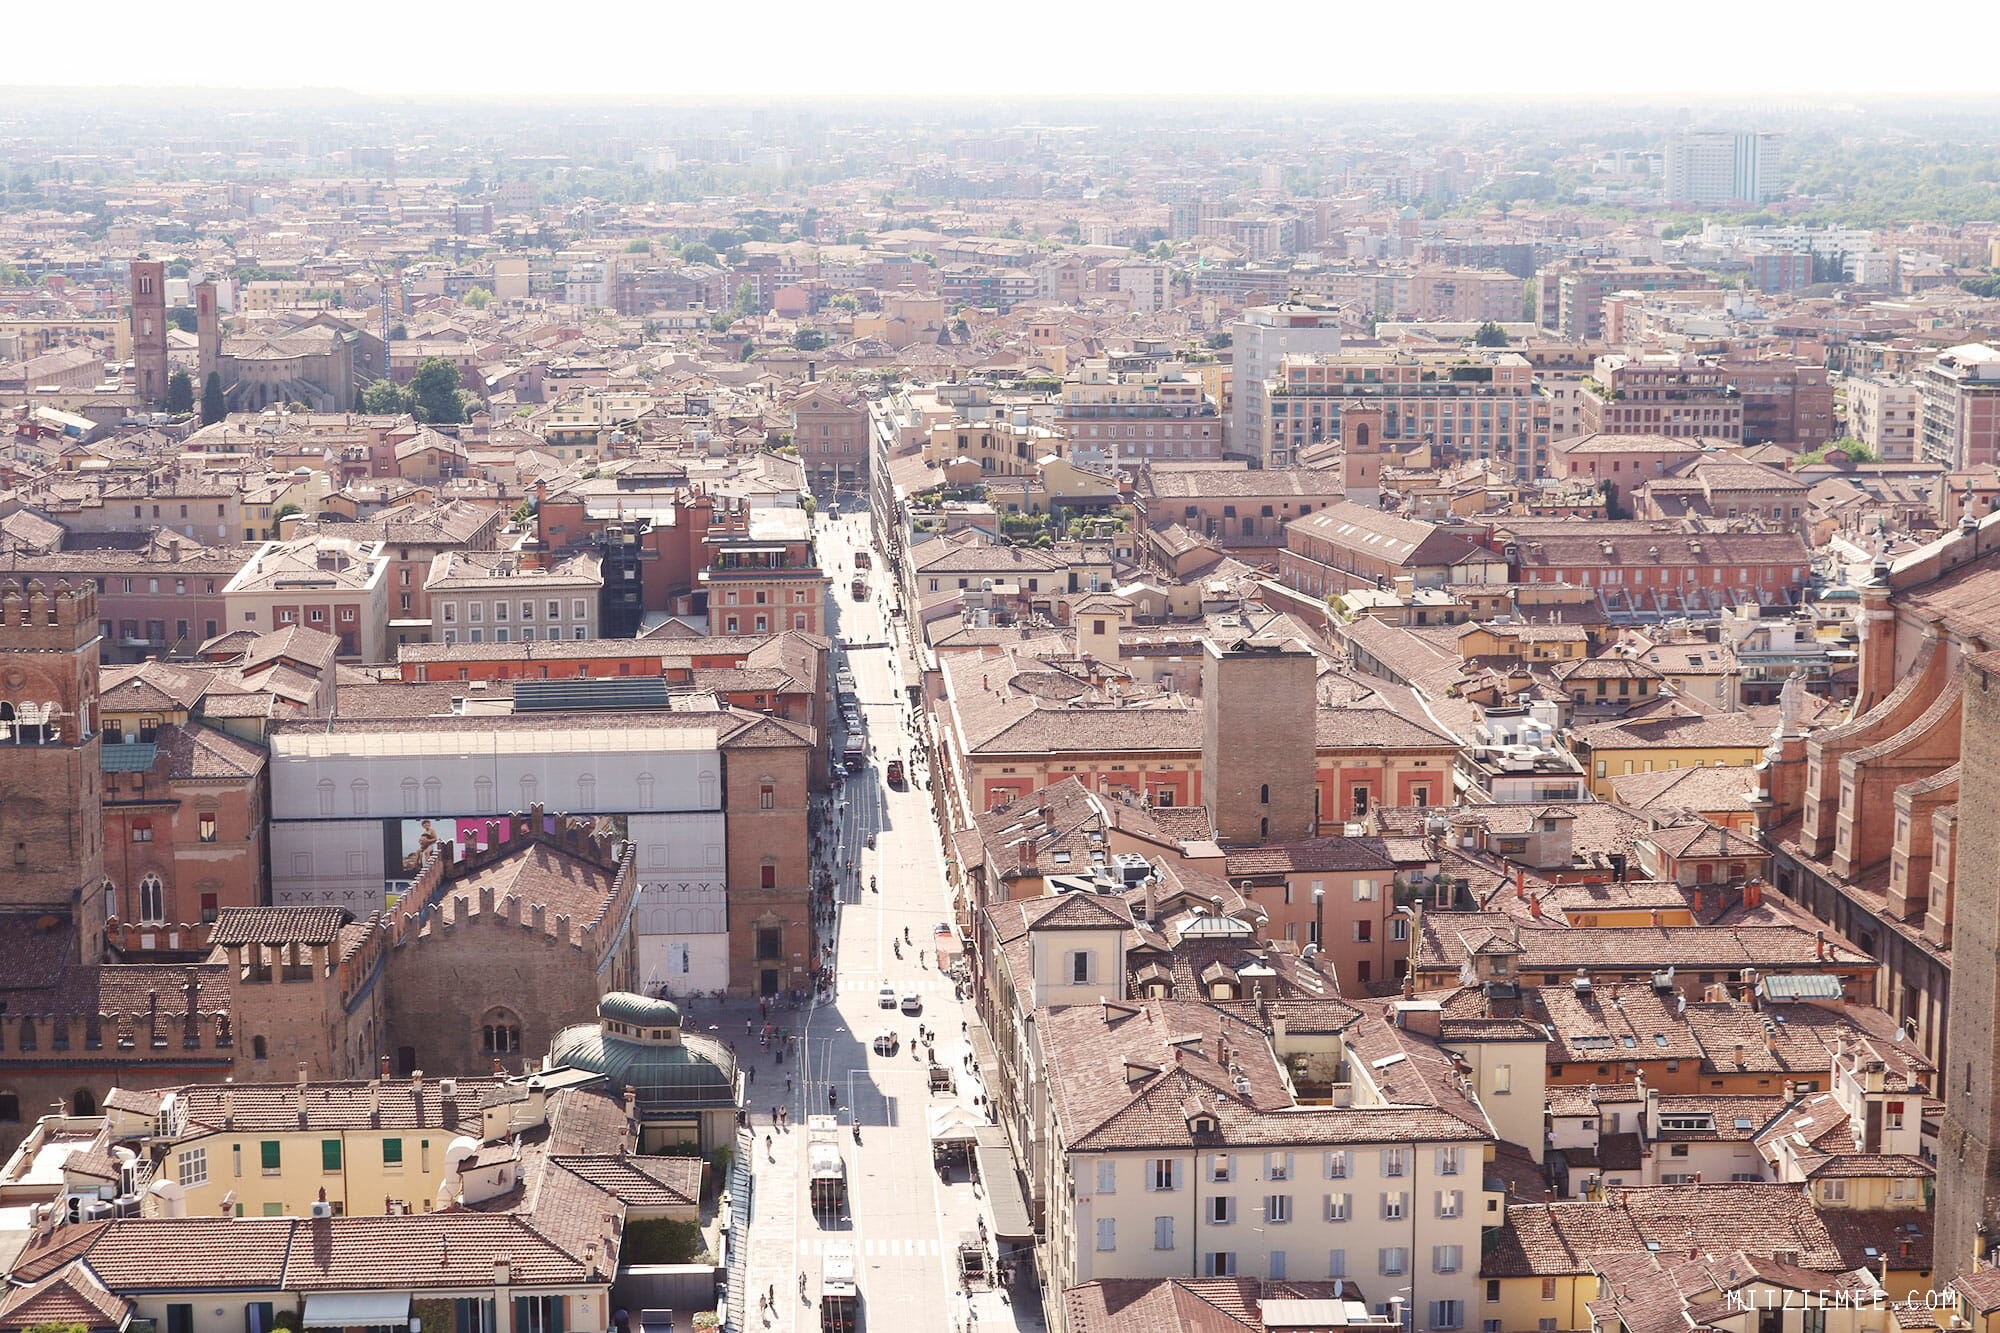 View from Asinelli Tower, Bologna